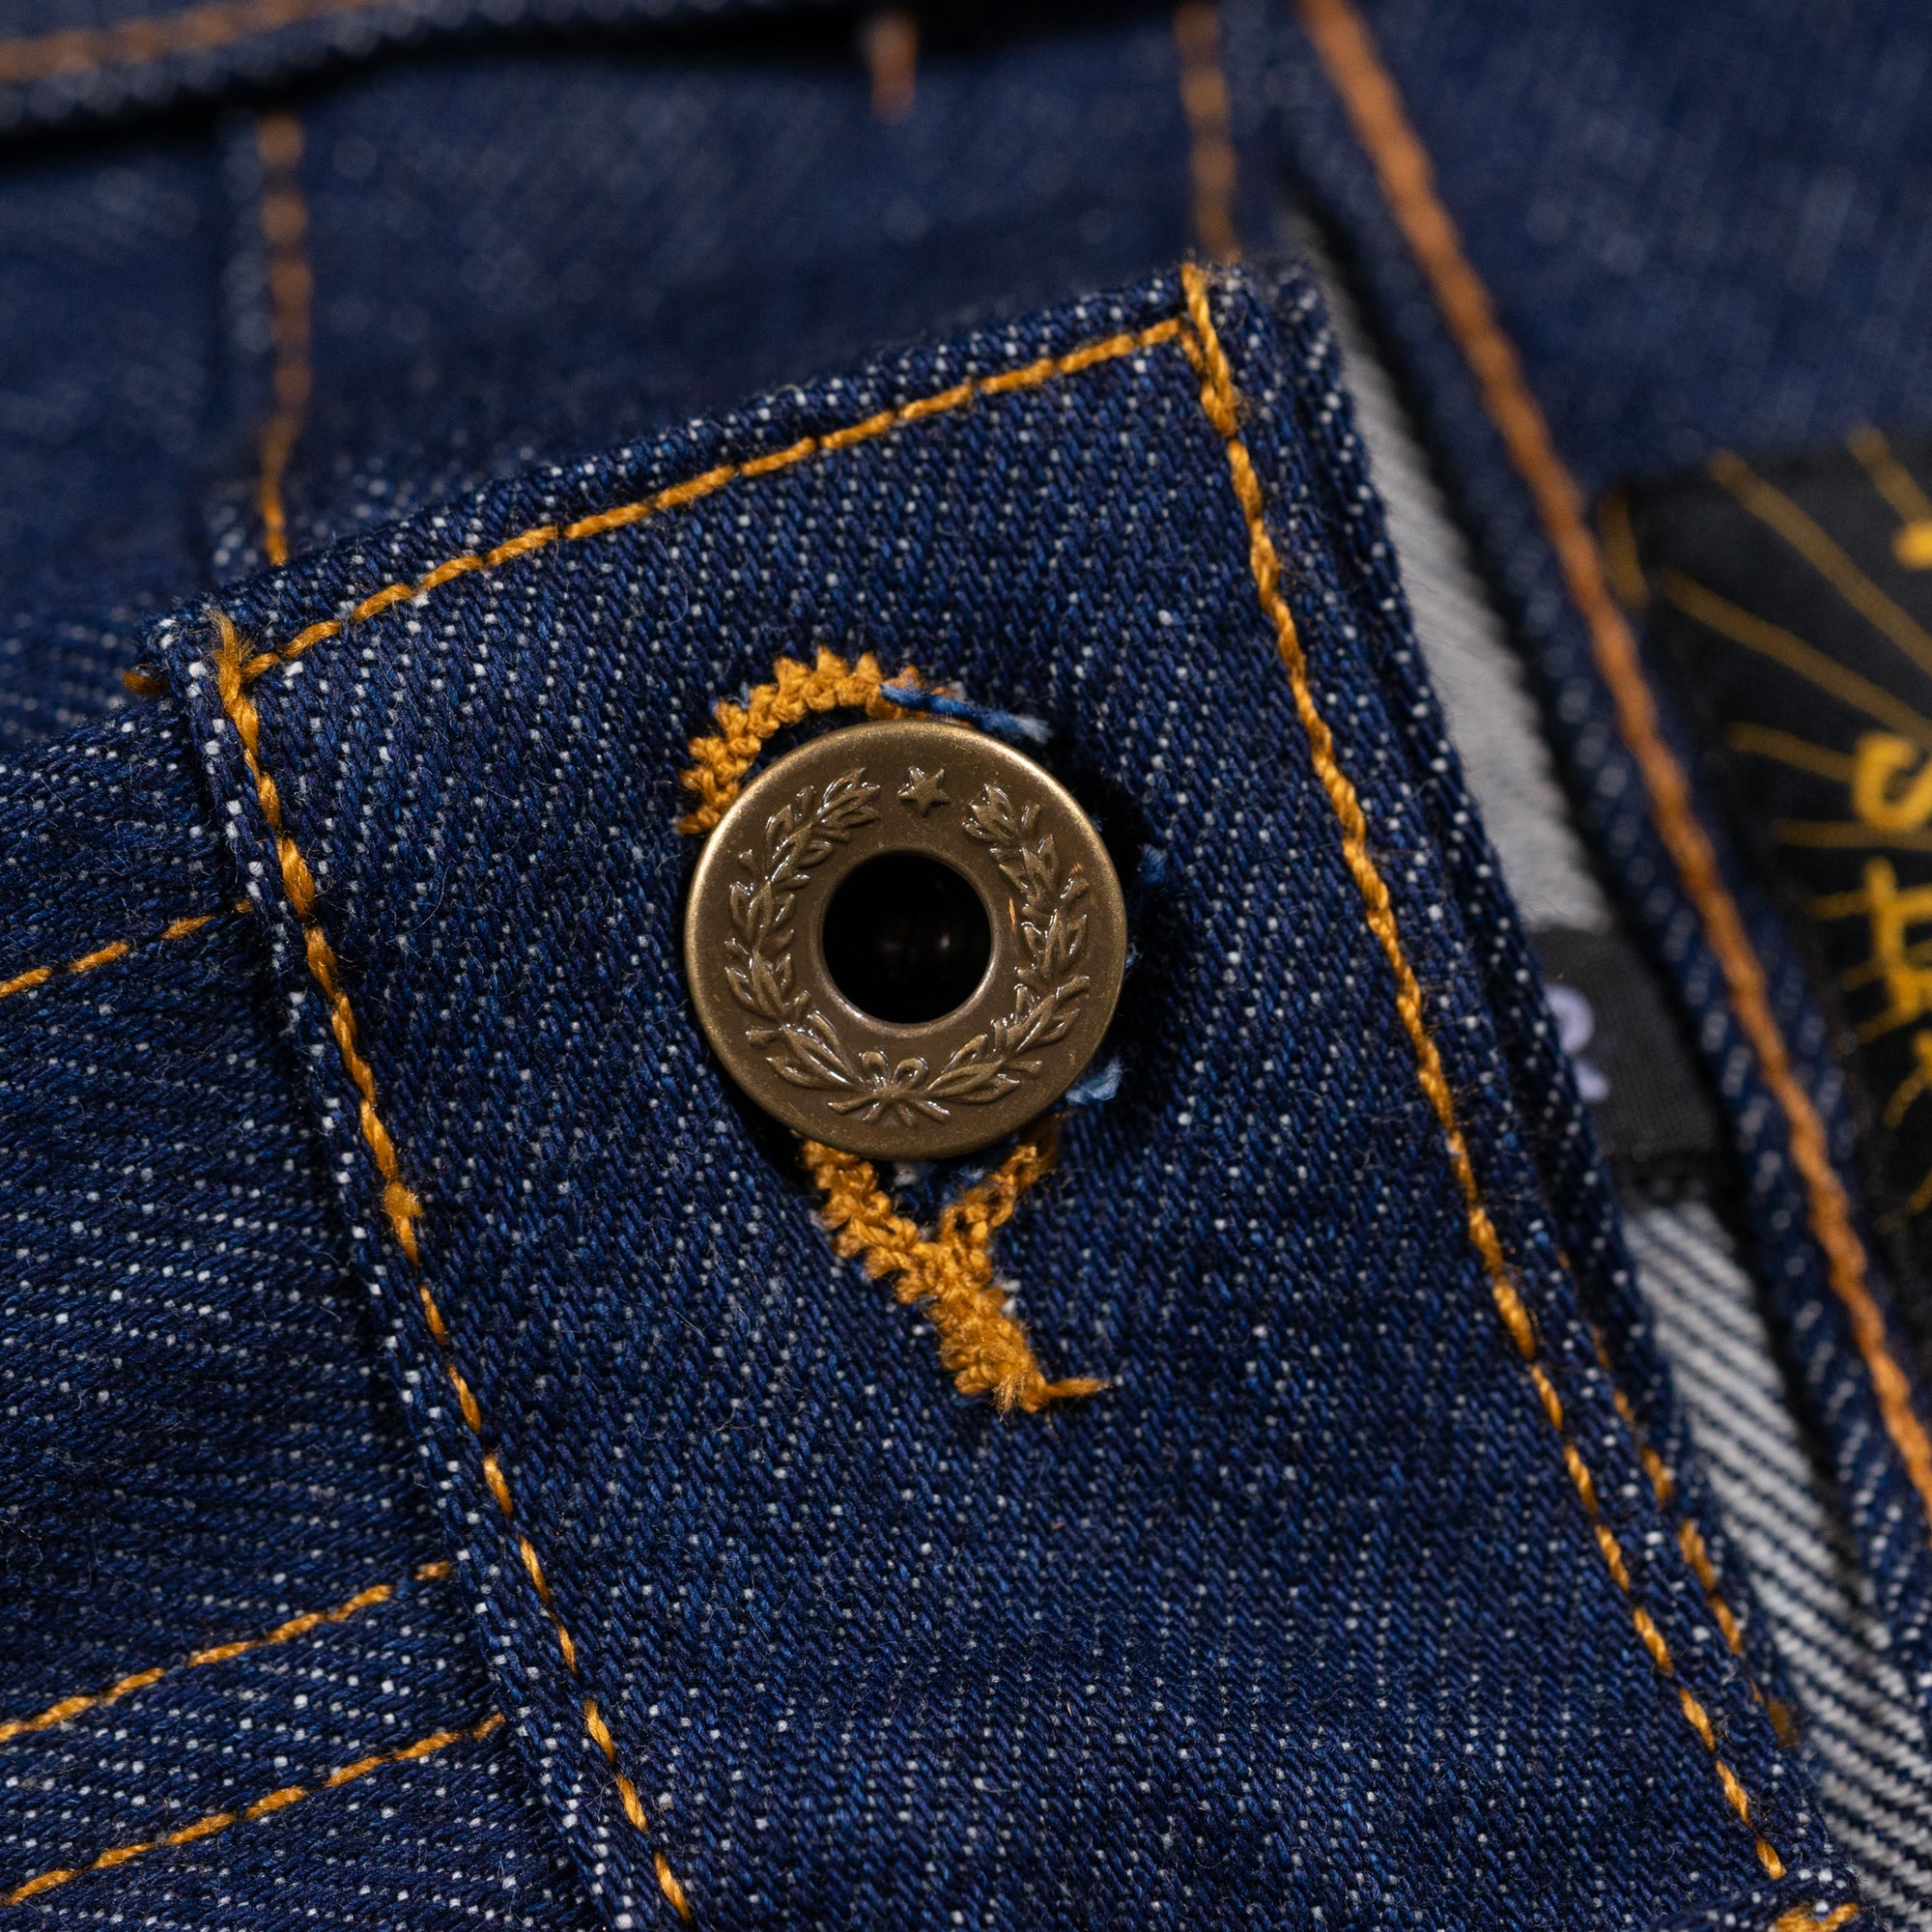 Landless Gentry: Denim Review: 15 oz. Cone mills Selvage by